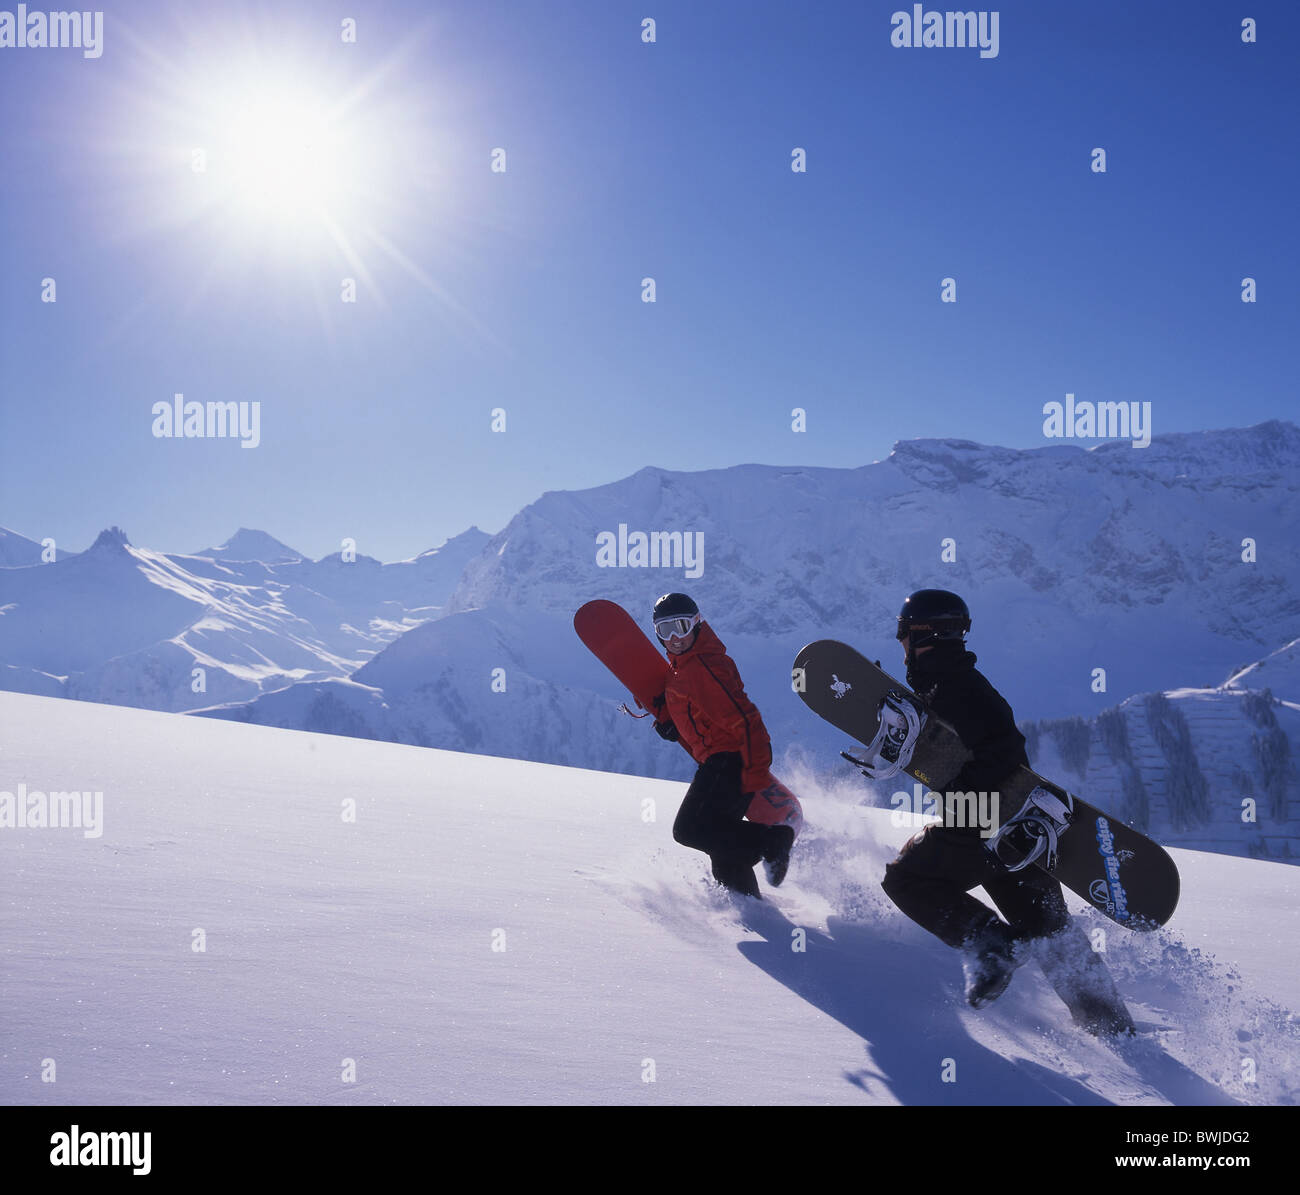 Two Snowboarder way up deep snow stampend snowboard Snowboarding snow mountains Alps Bernese Oberland Adelbod Stock Photo